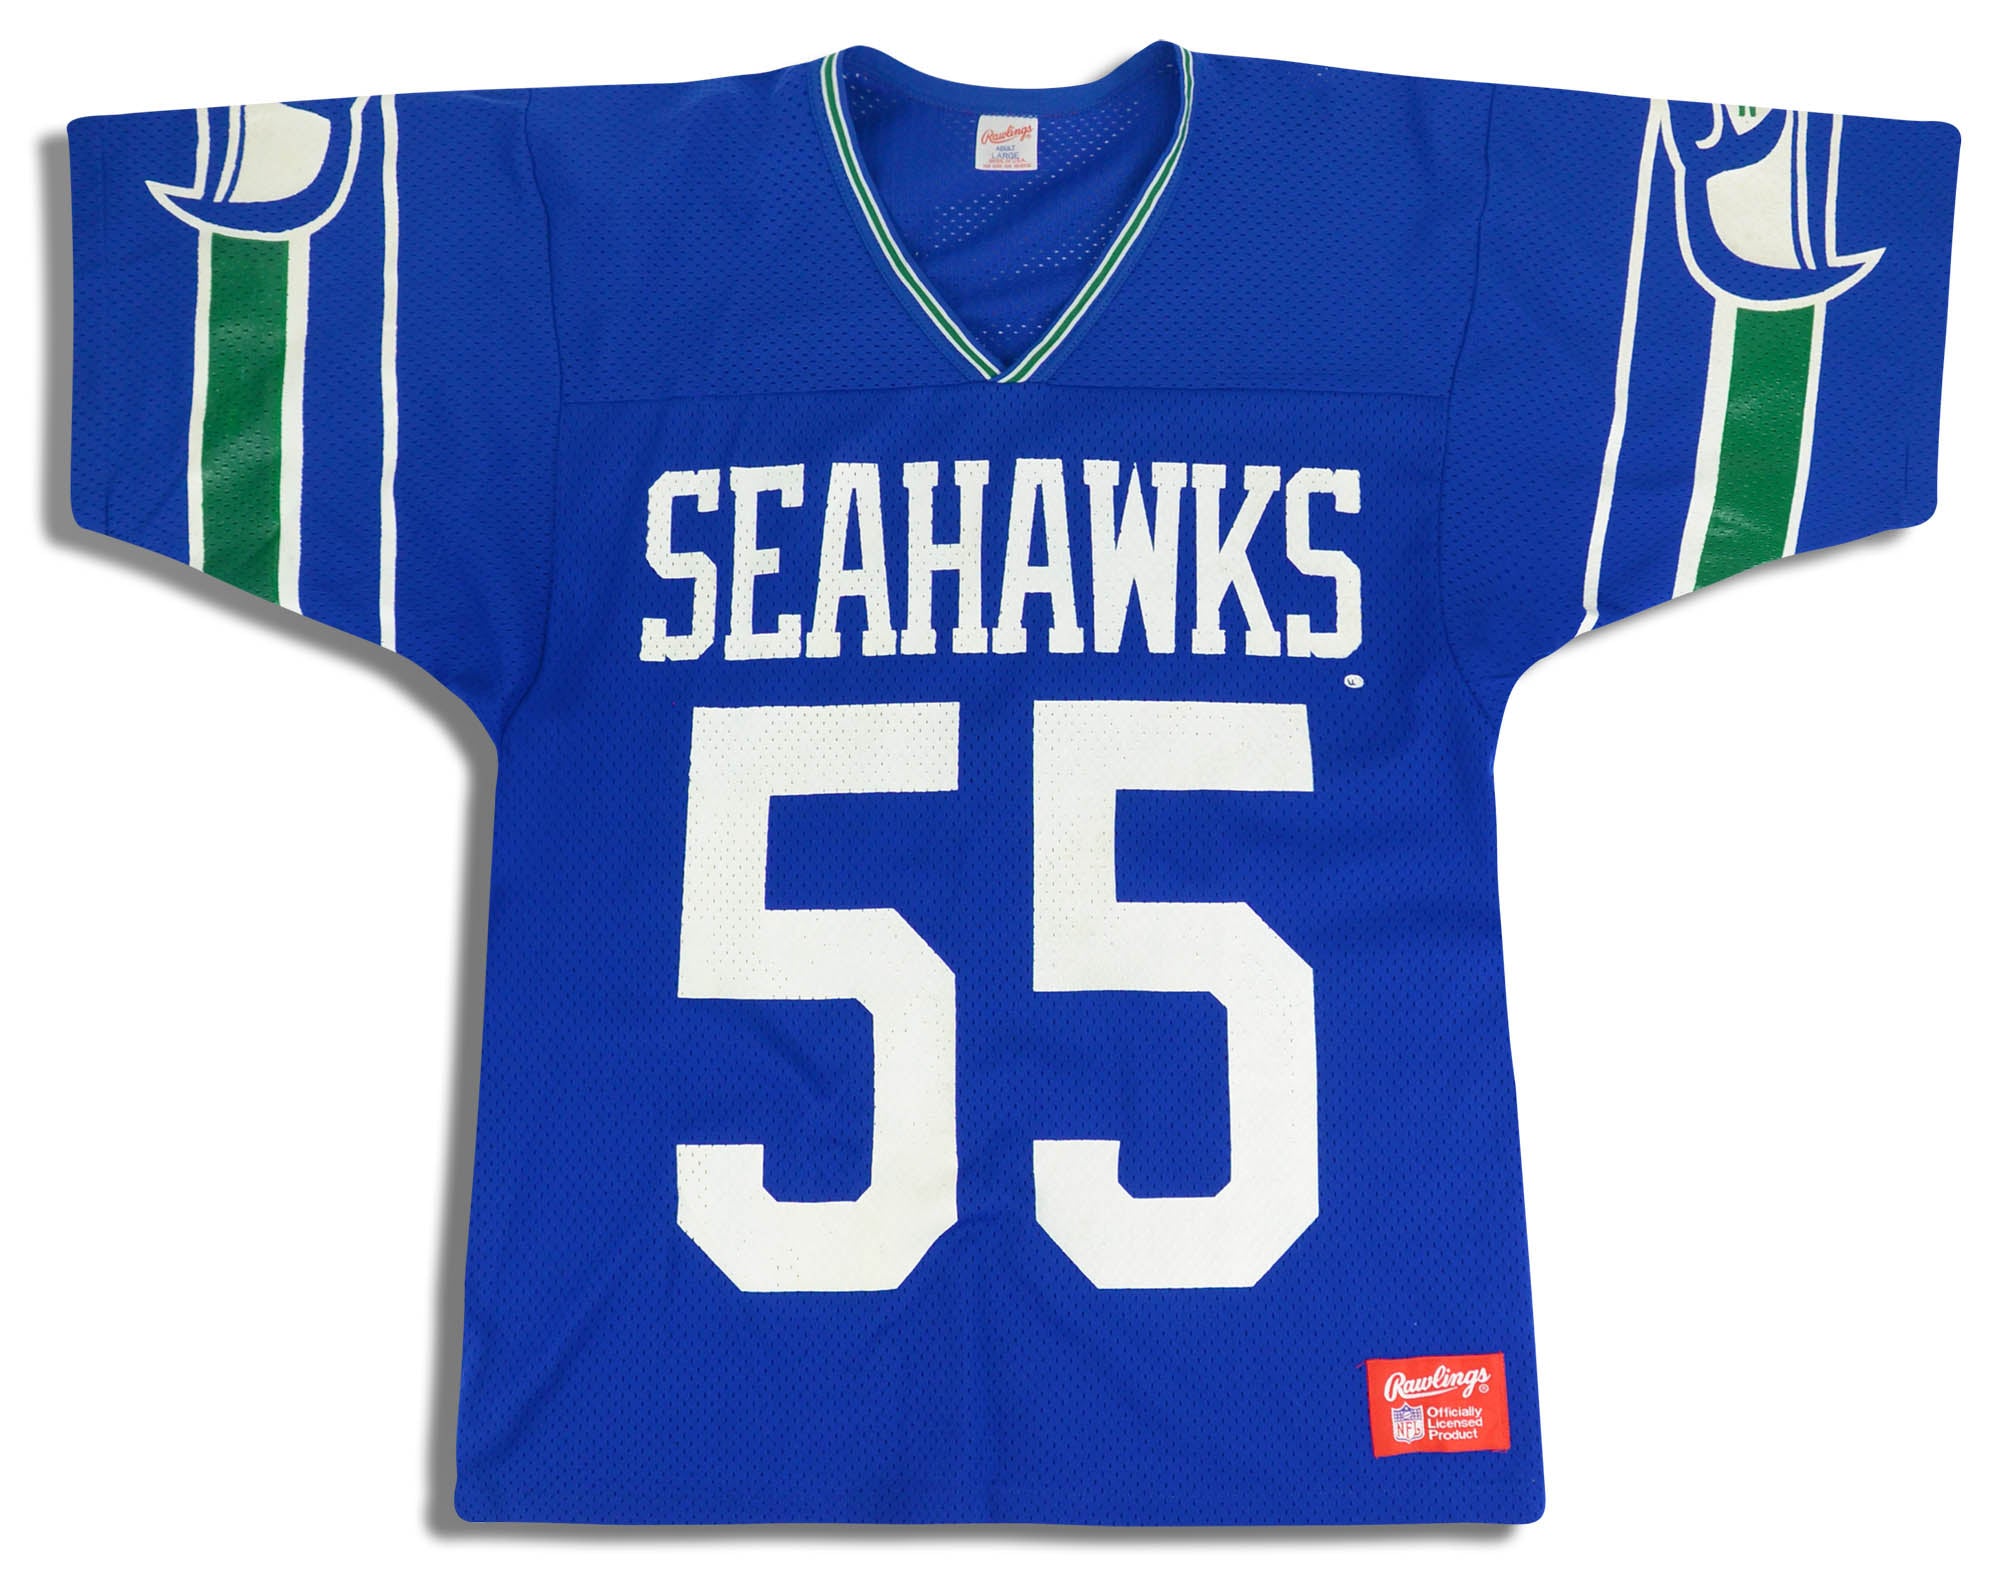 1987-89 SEATTLE SEAHAWKS BOSWORTH #55 RAWLINGS JERSEY (HOME) L - Classic  American Sports